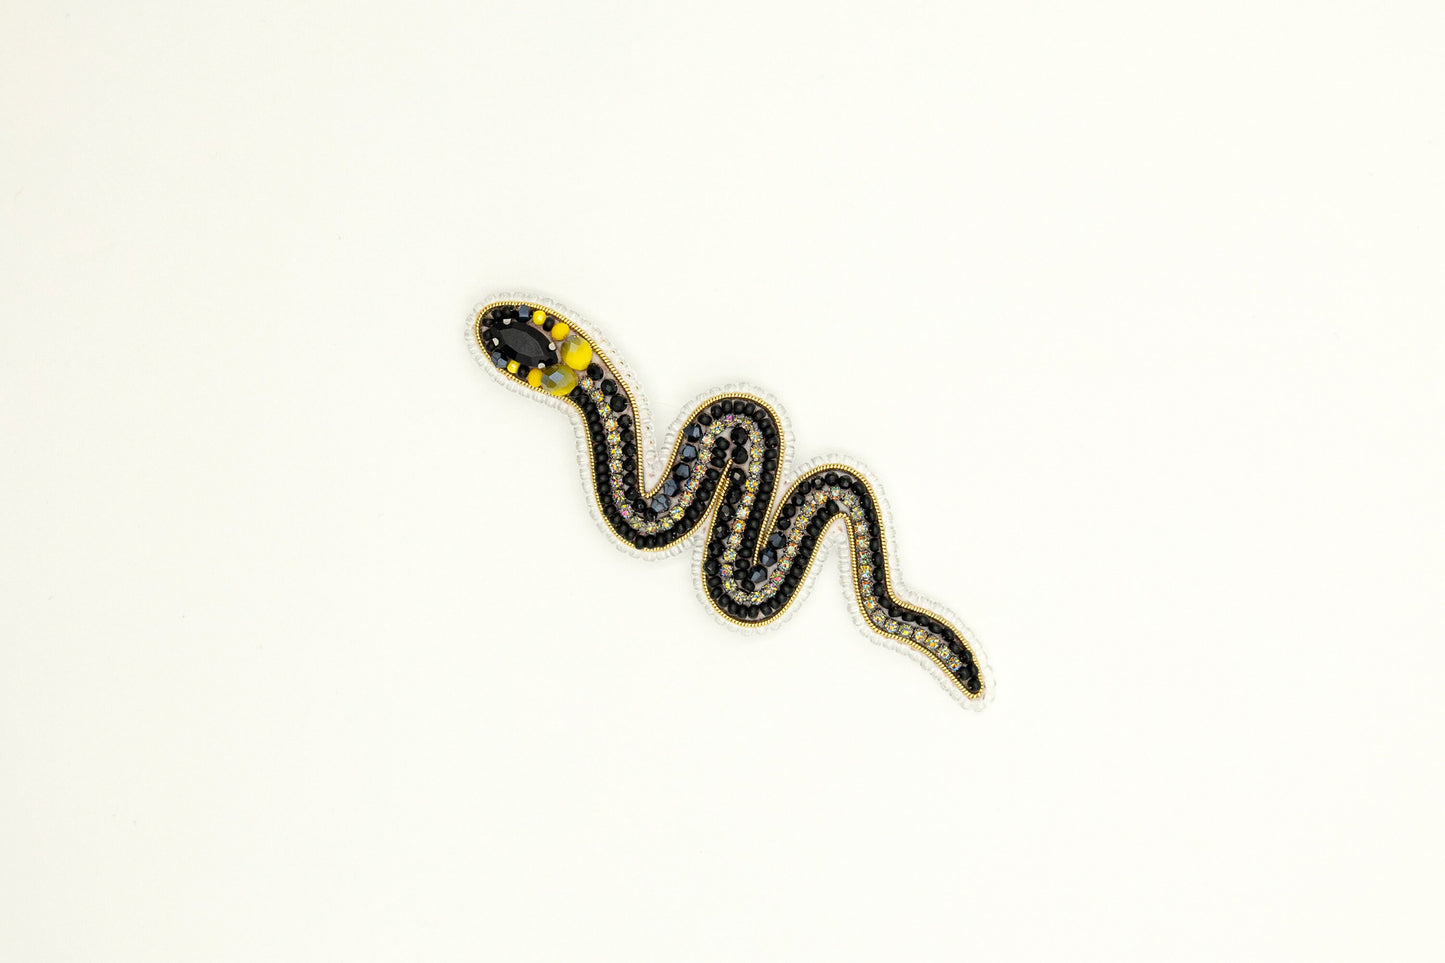 a black and yellow snake on a white background